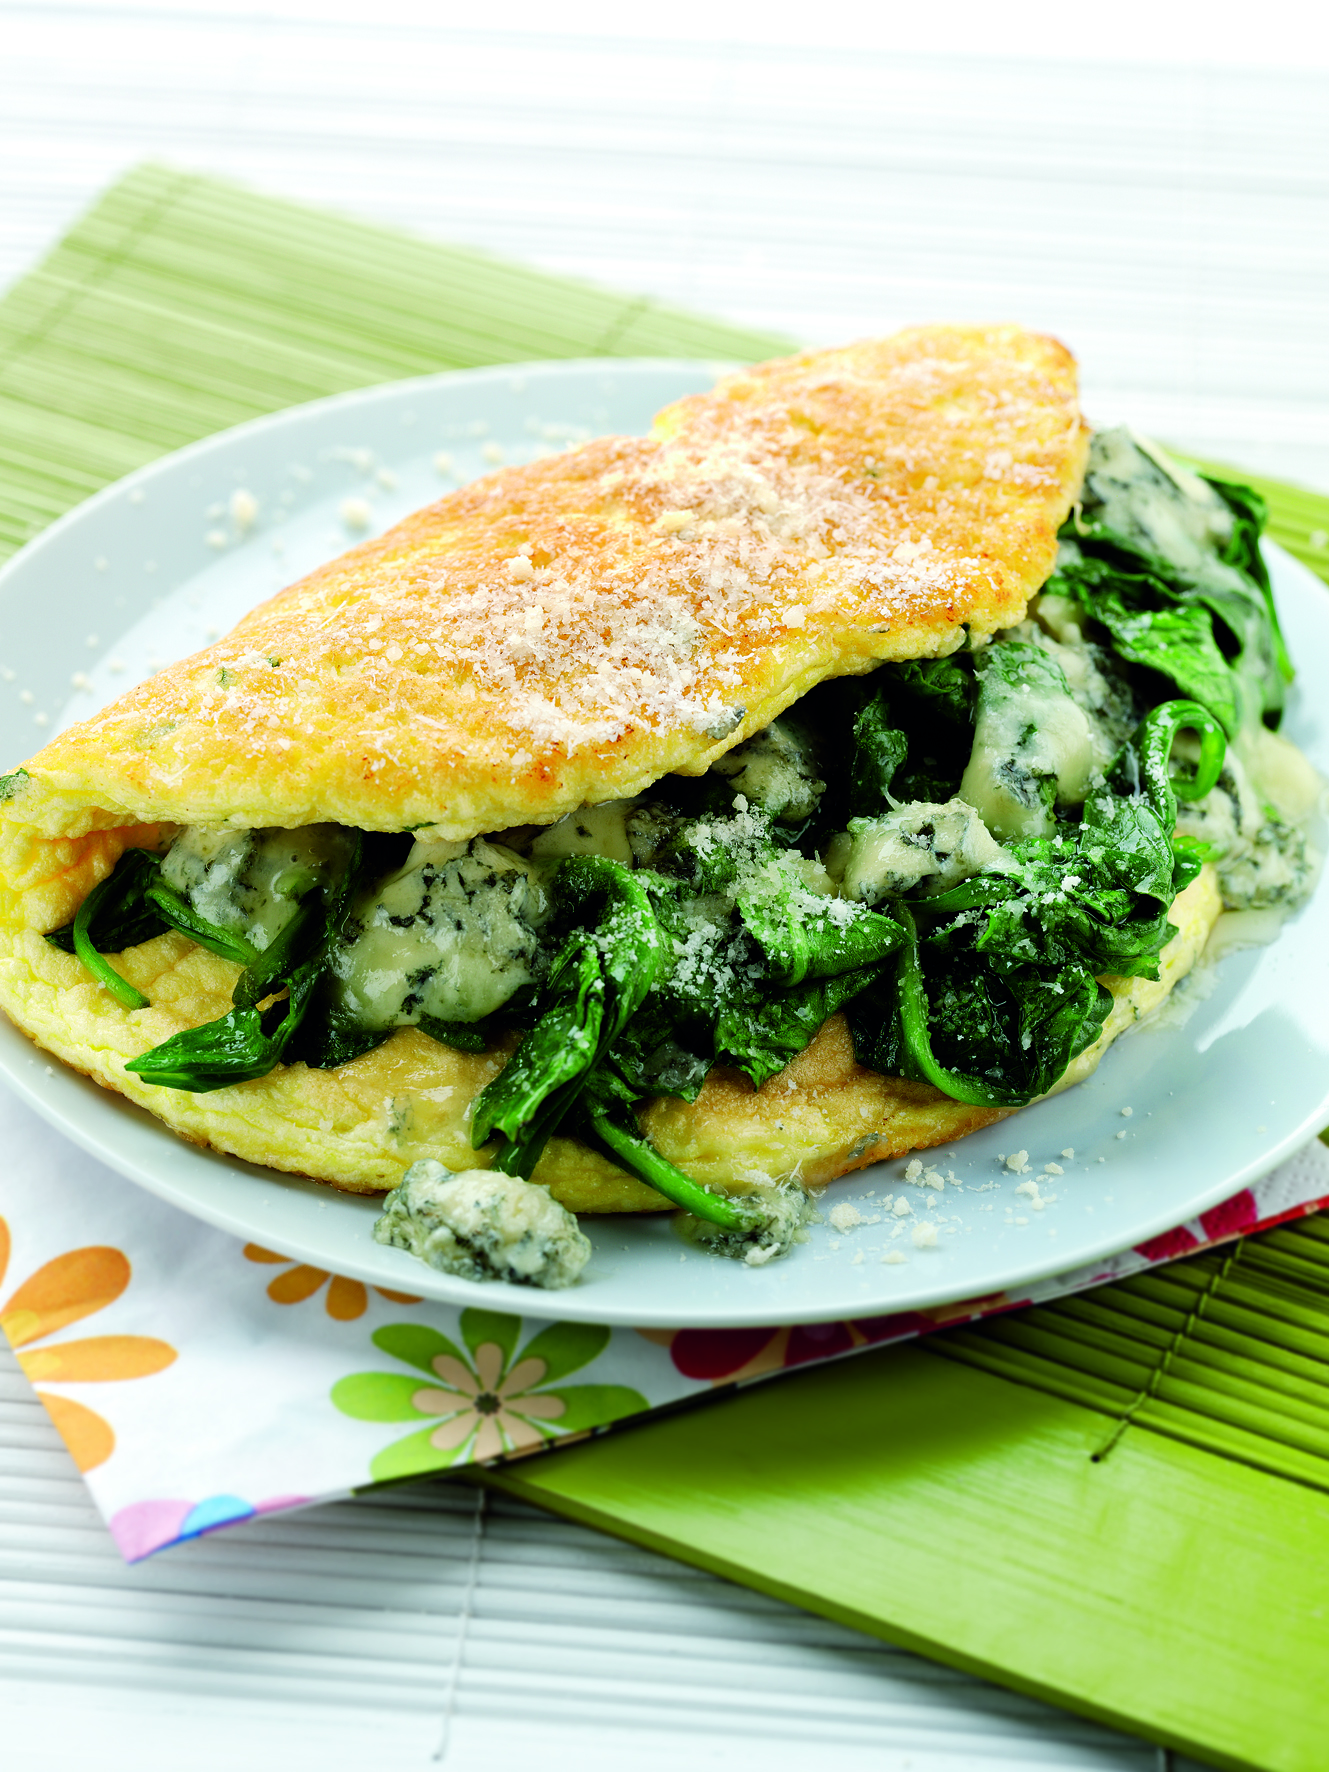 Souffleed Spinach Omelette - Uncle Vinny's Produce